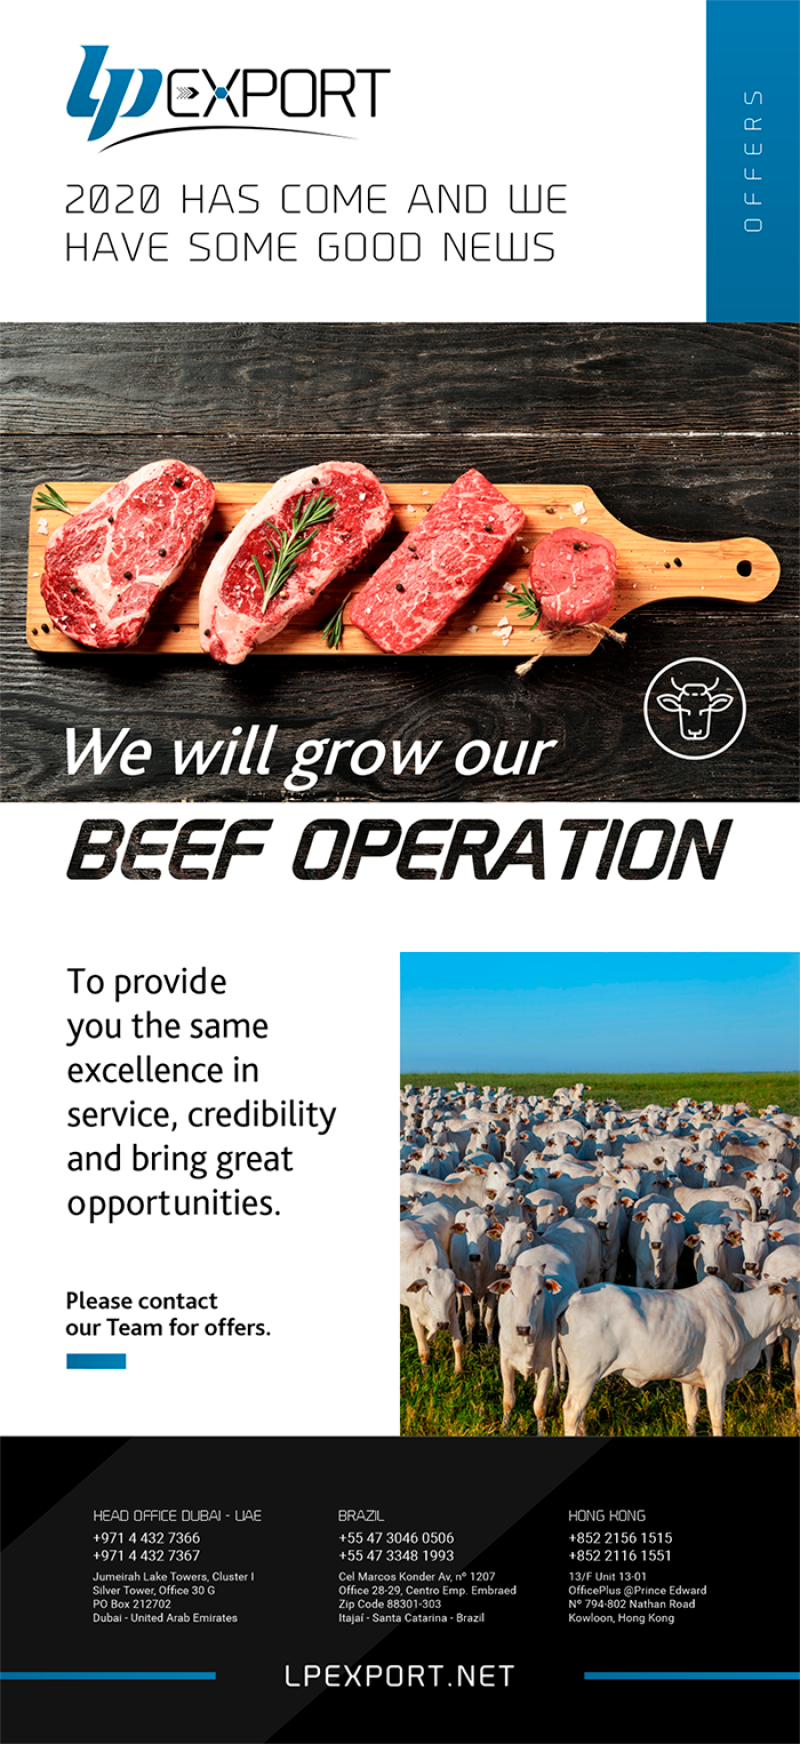 LP Export | We have some good news: BEEF OPERATION